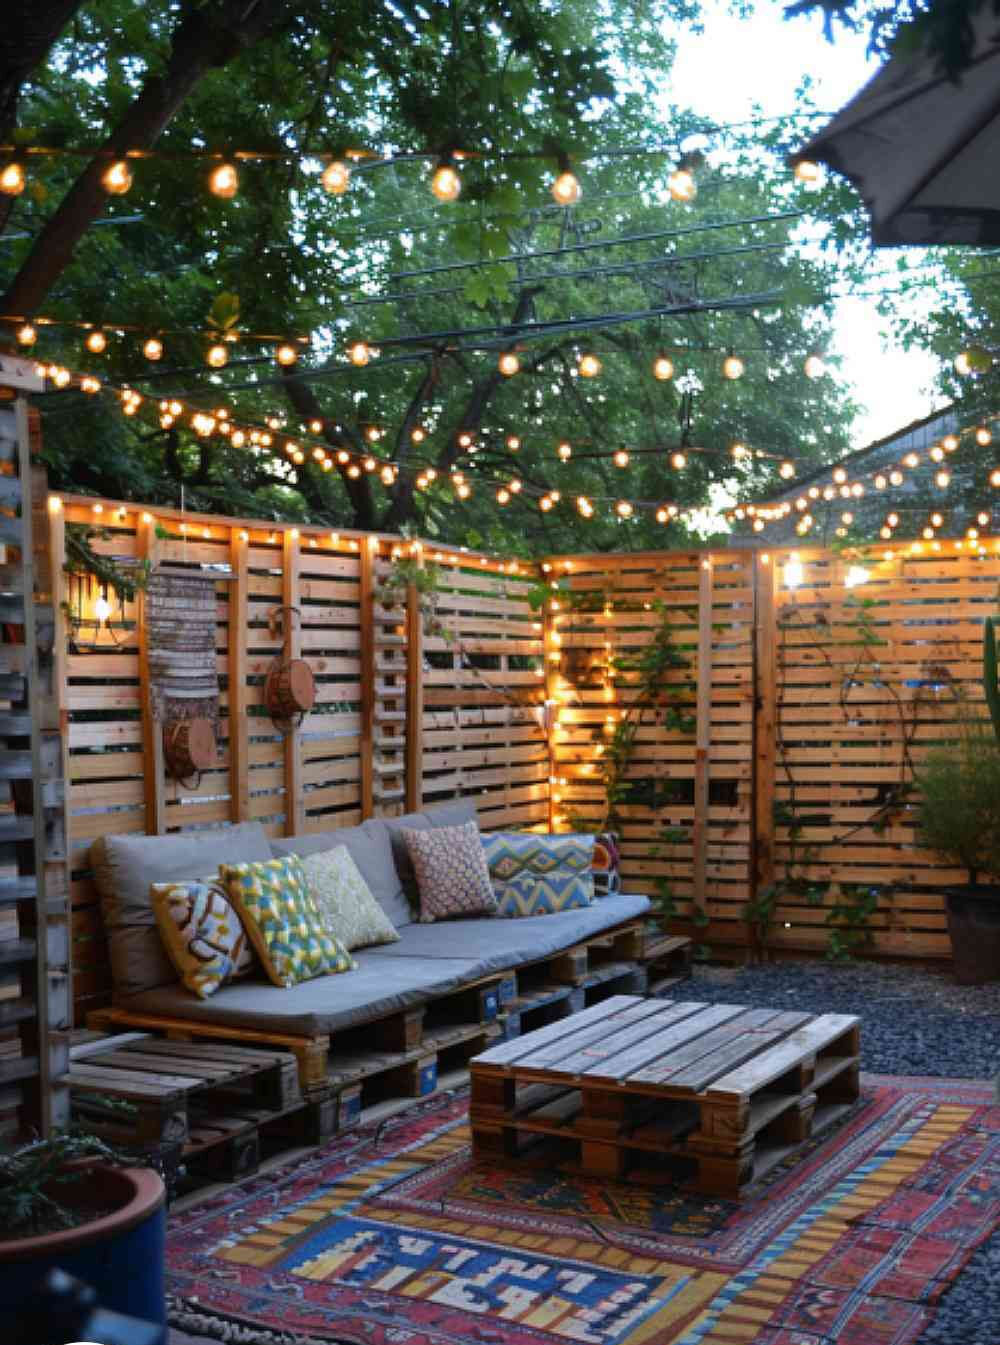 Exploring the Beauty of Handcrafted Outdoor Spaces